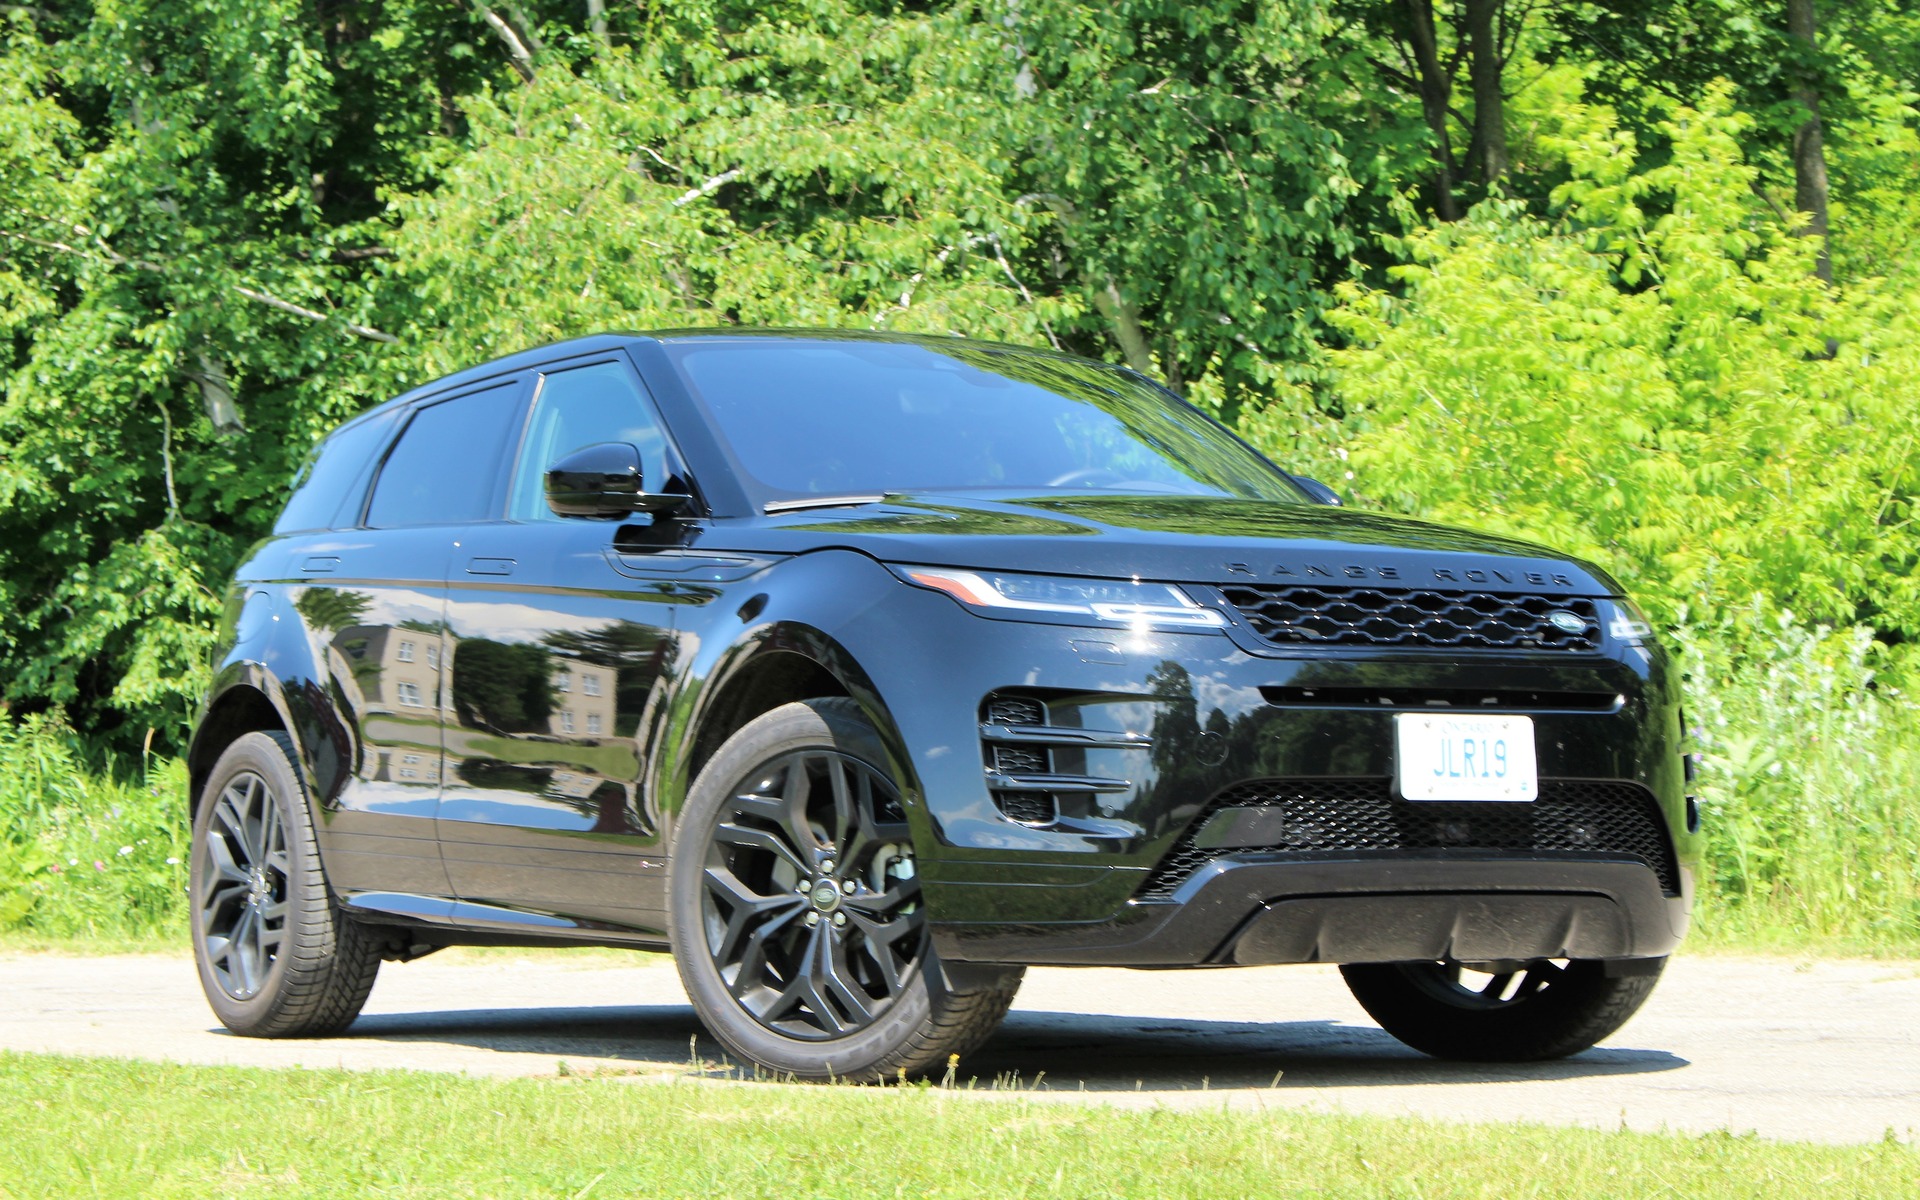 Range Rover Evoque 2020 Interior Night  : Read Reviews, Browse Our Car Inventory, And More.